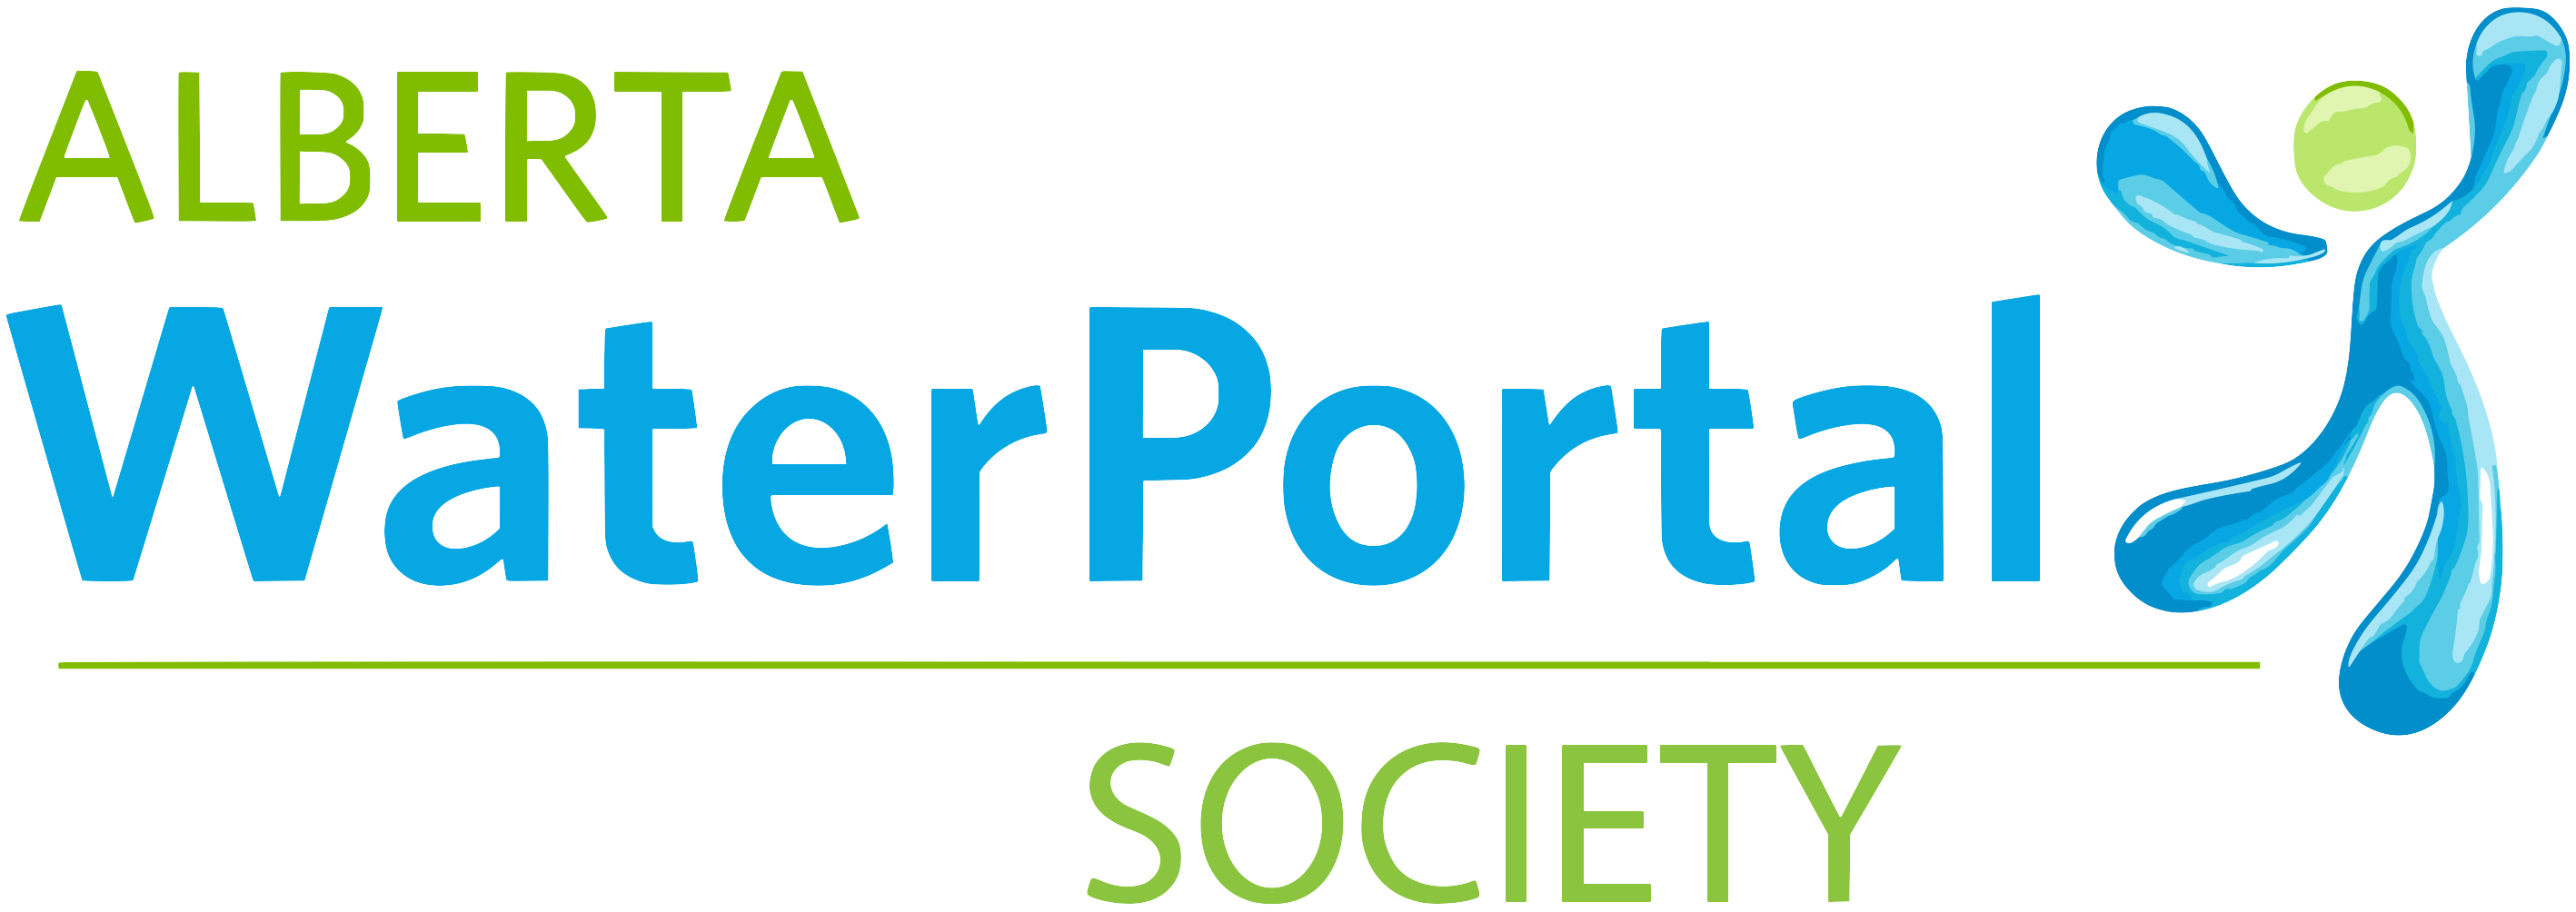 Logo for Alberta WaterPortal Society on a transparent background